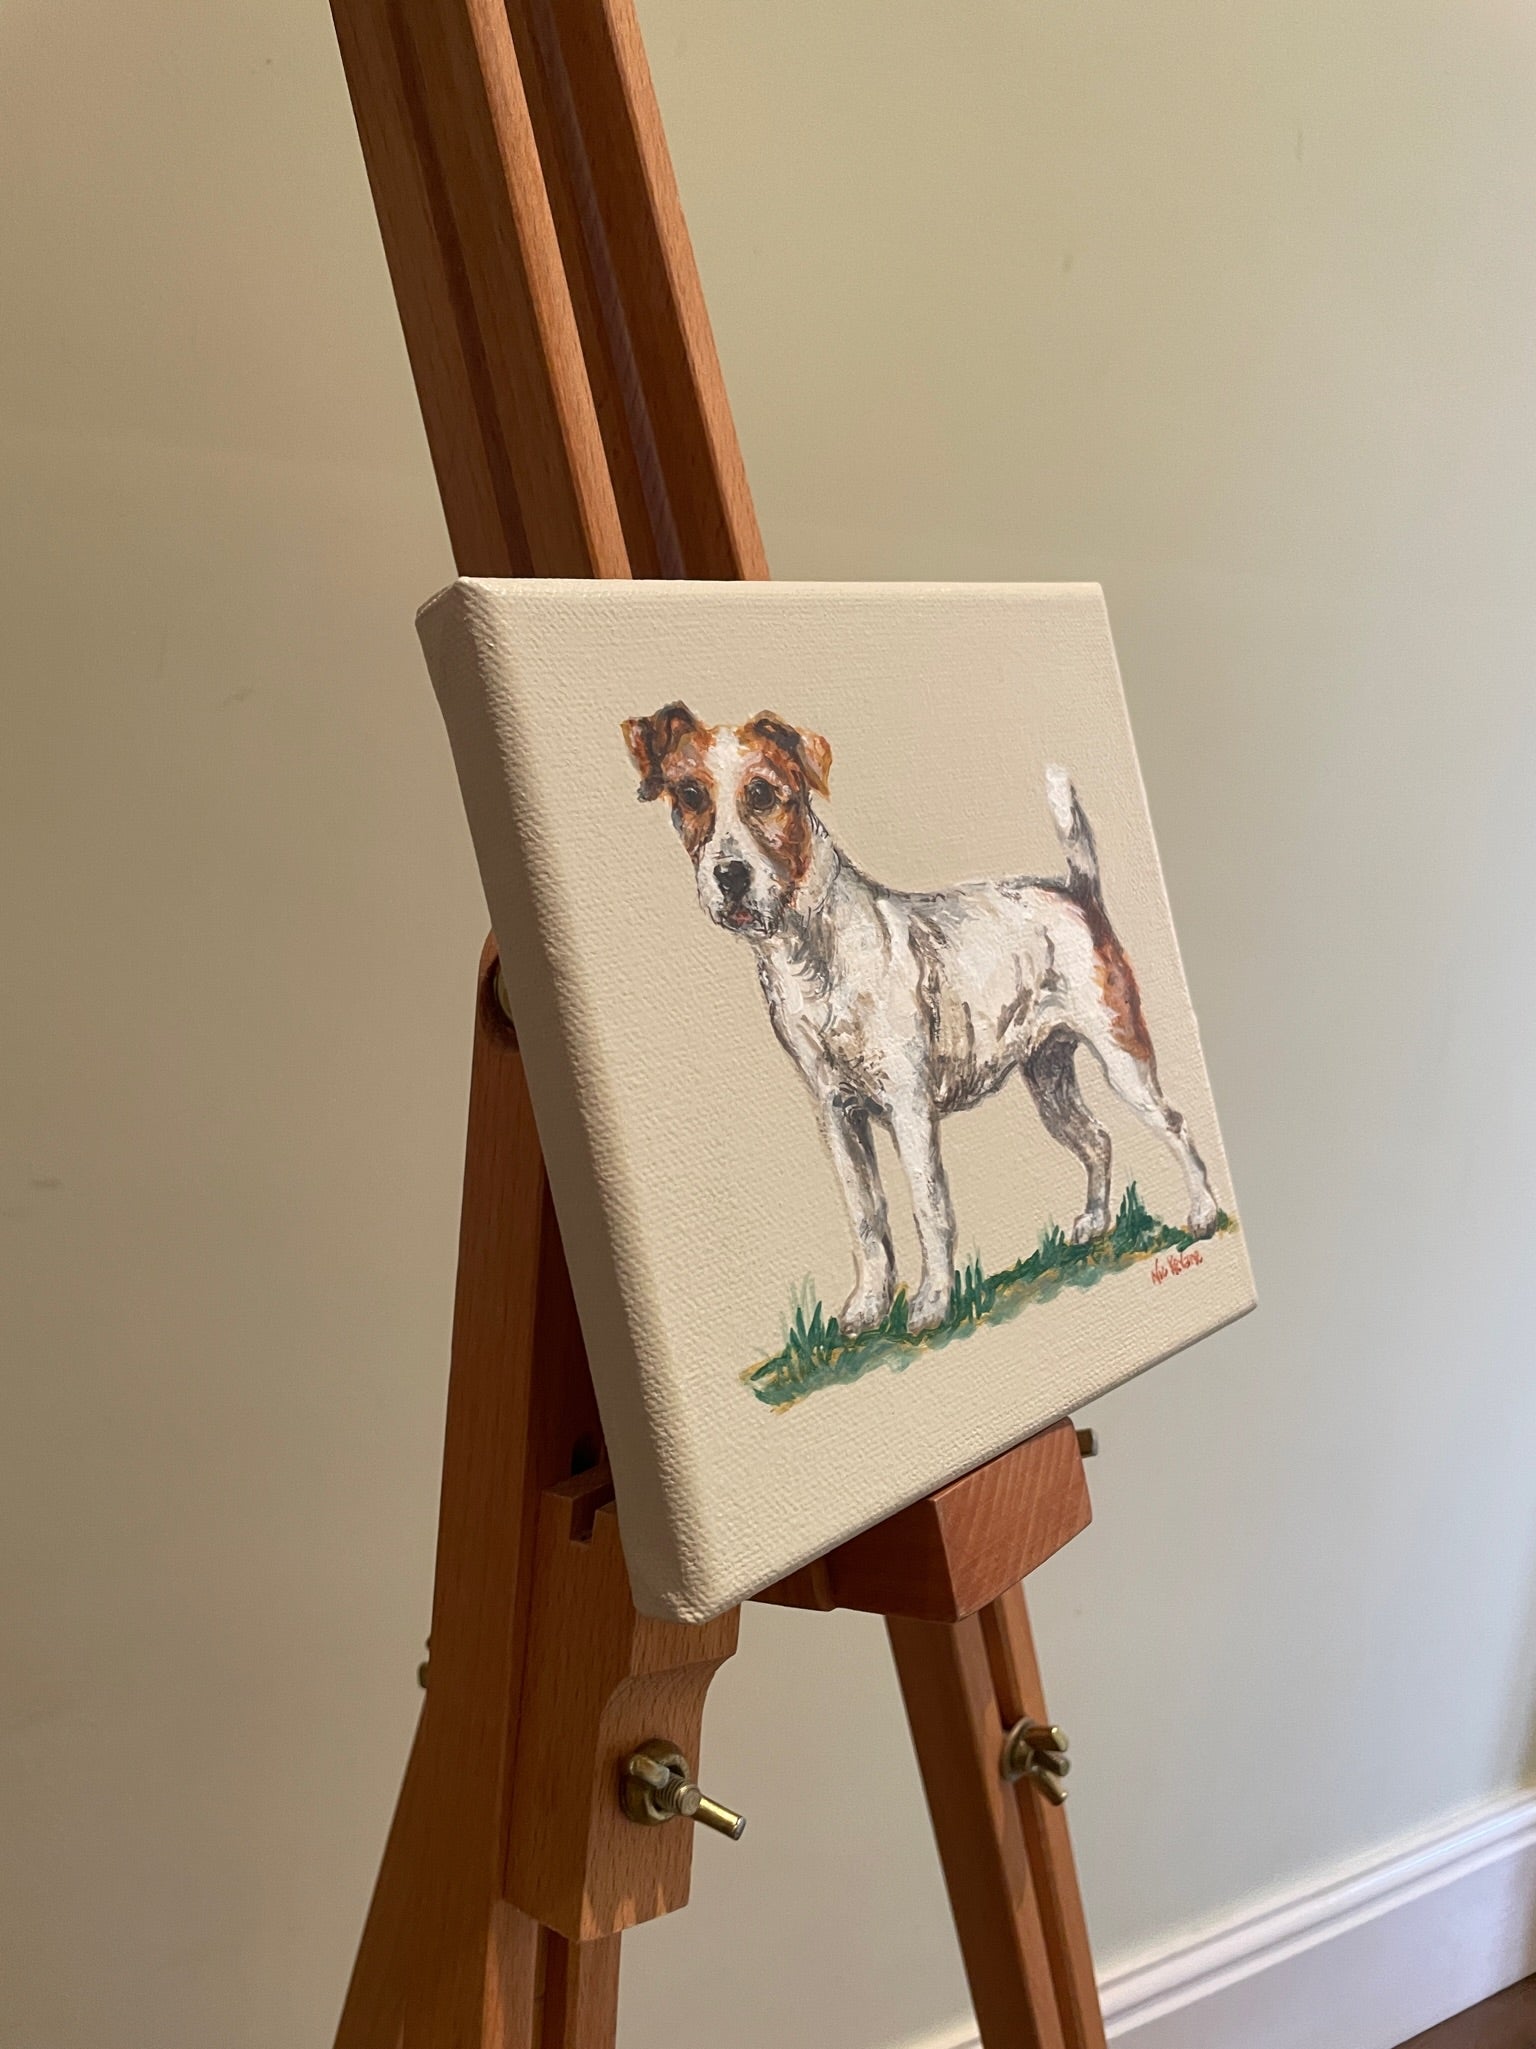 Jack Russell - 15cm x 15cm mini paintings depicting various countryside subjects.